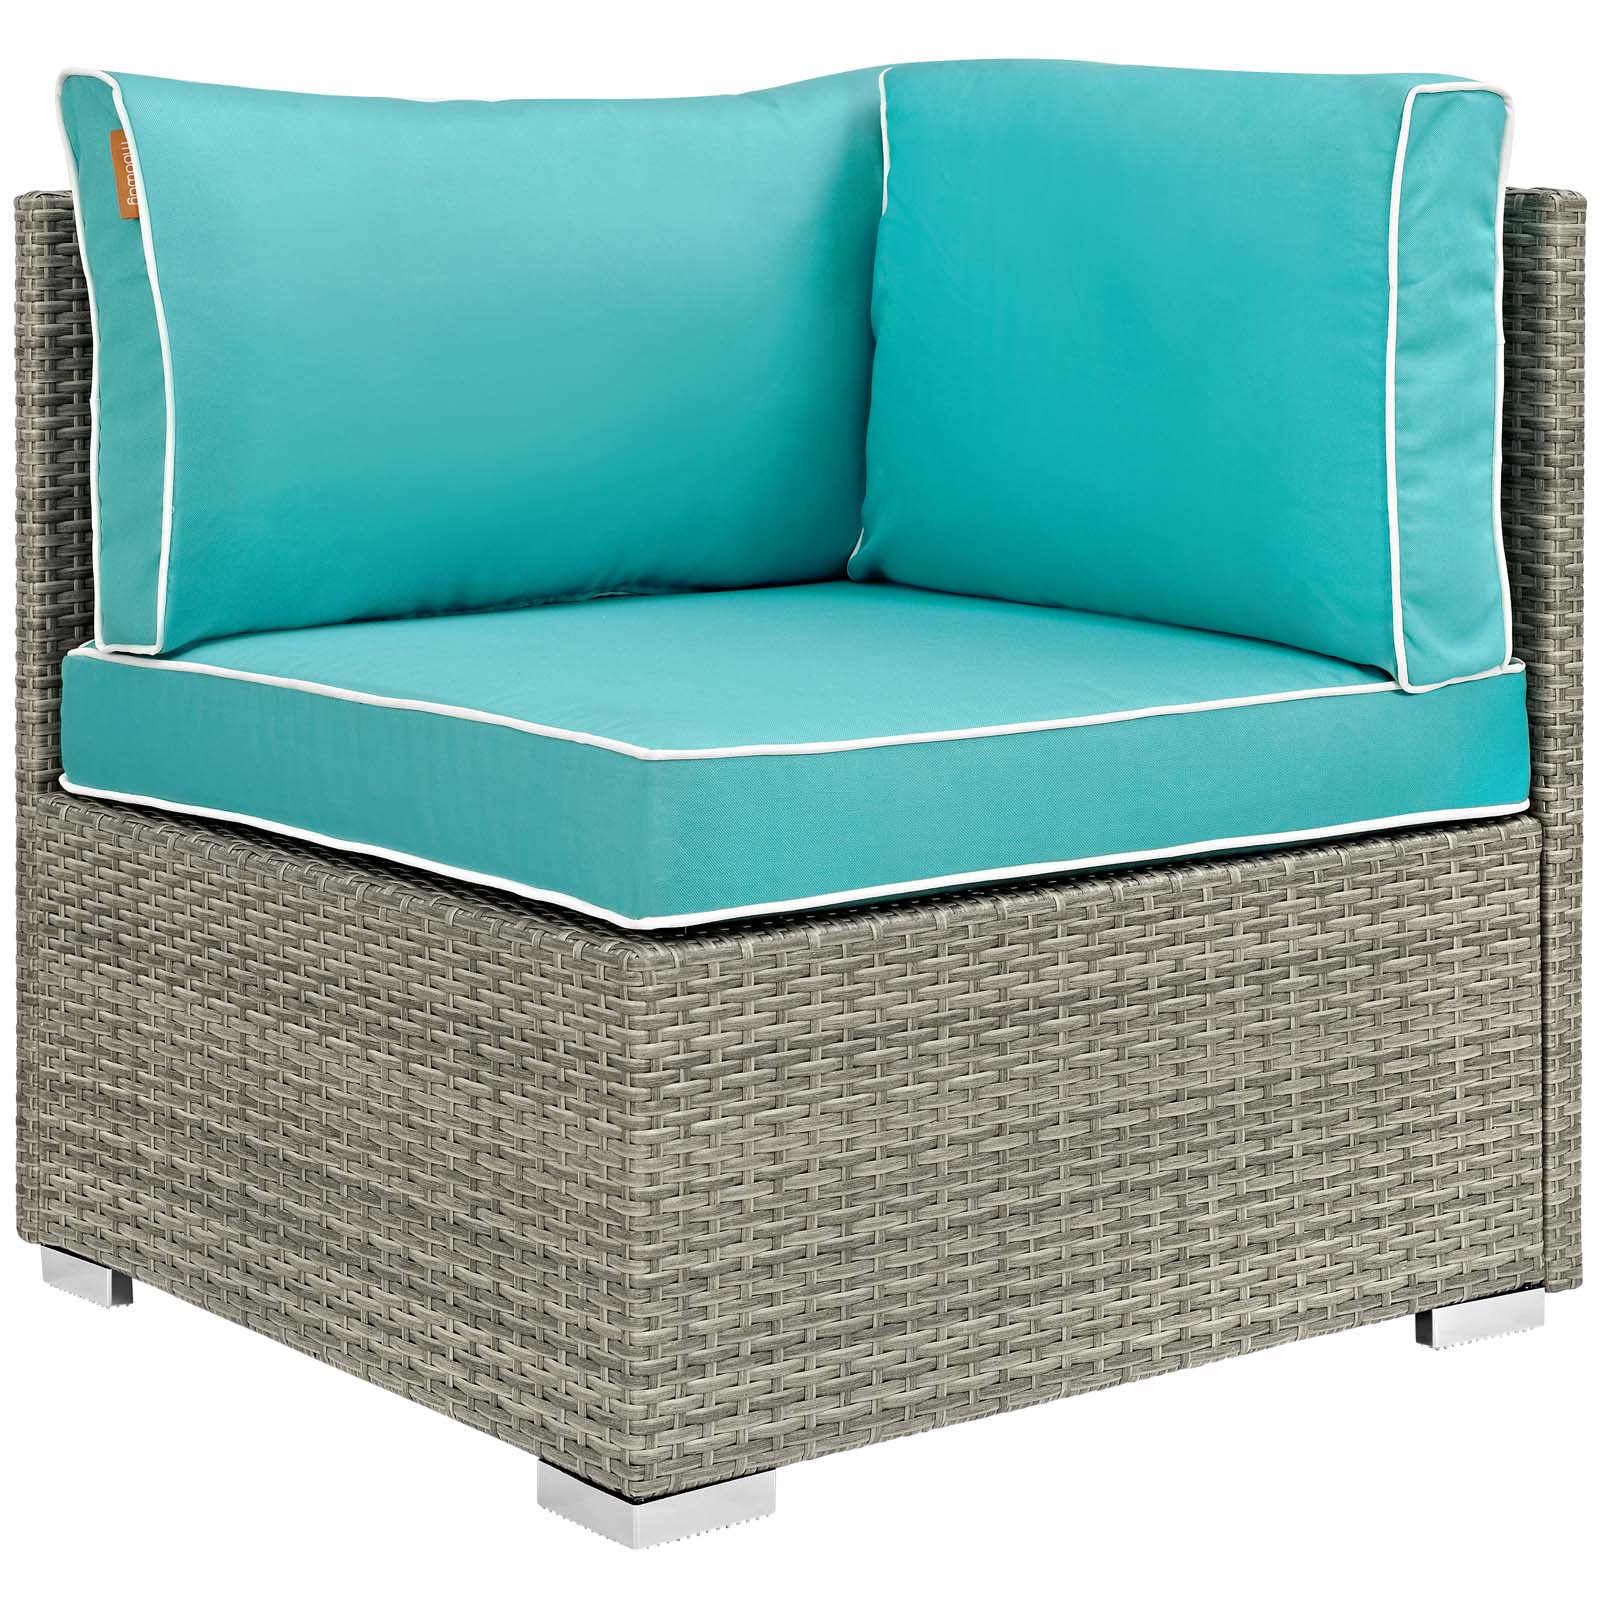 LexMod Repose Outdoor Patio Corner in Light Gray Turquoise